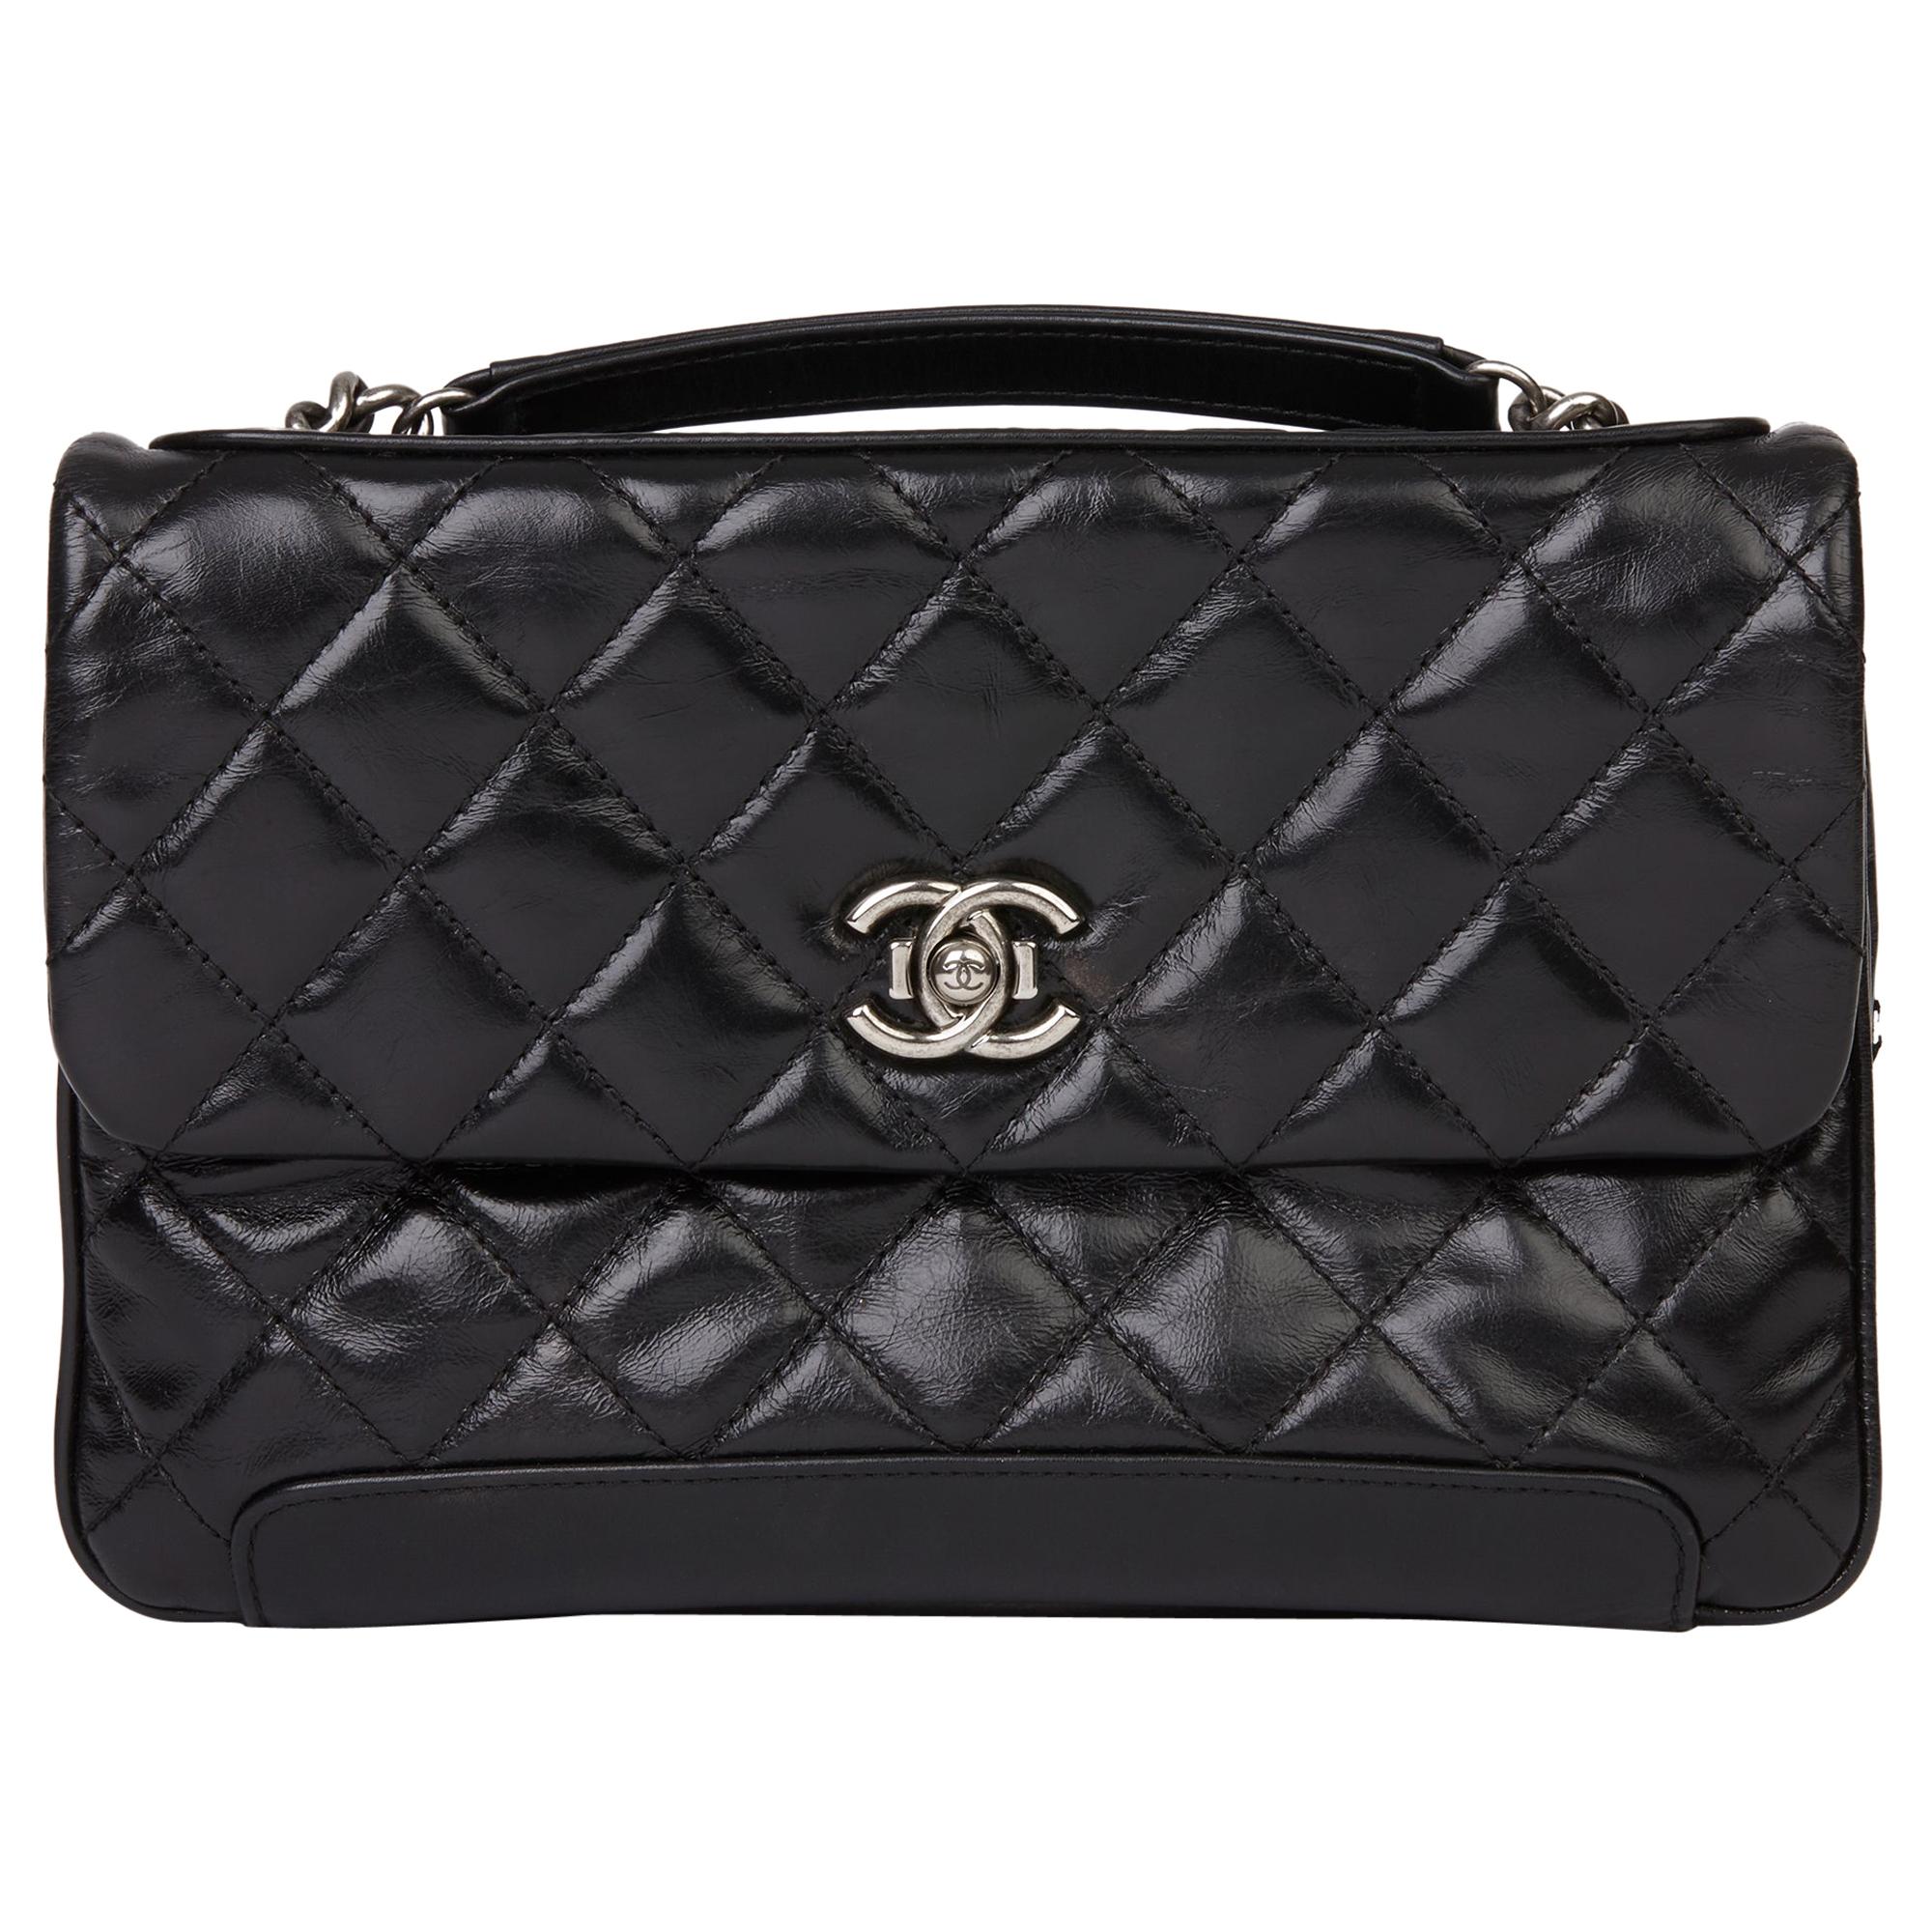 2013 Chanel Black Quilted Glazed Calfskin Leather Classic Single Flap Bag